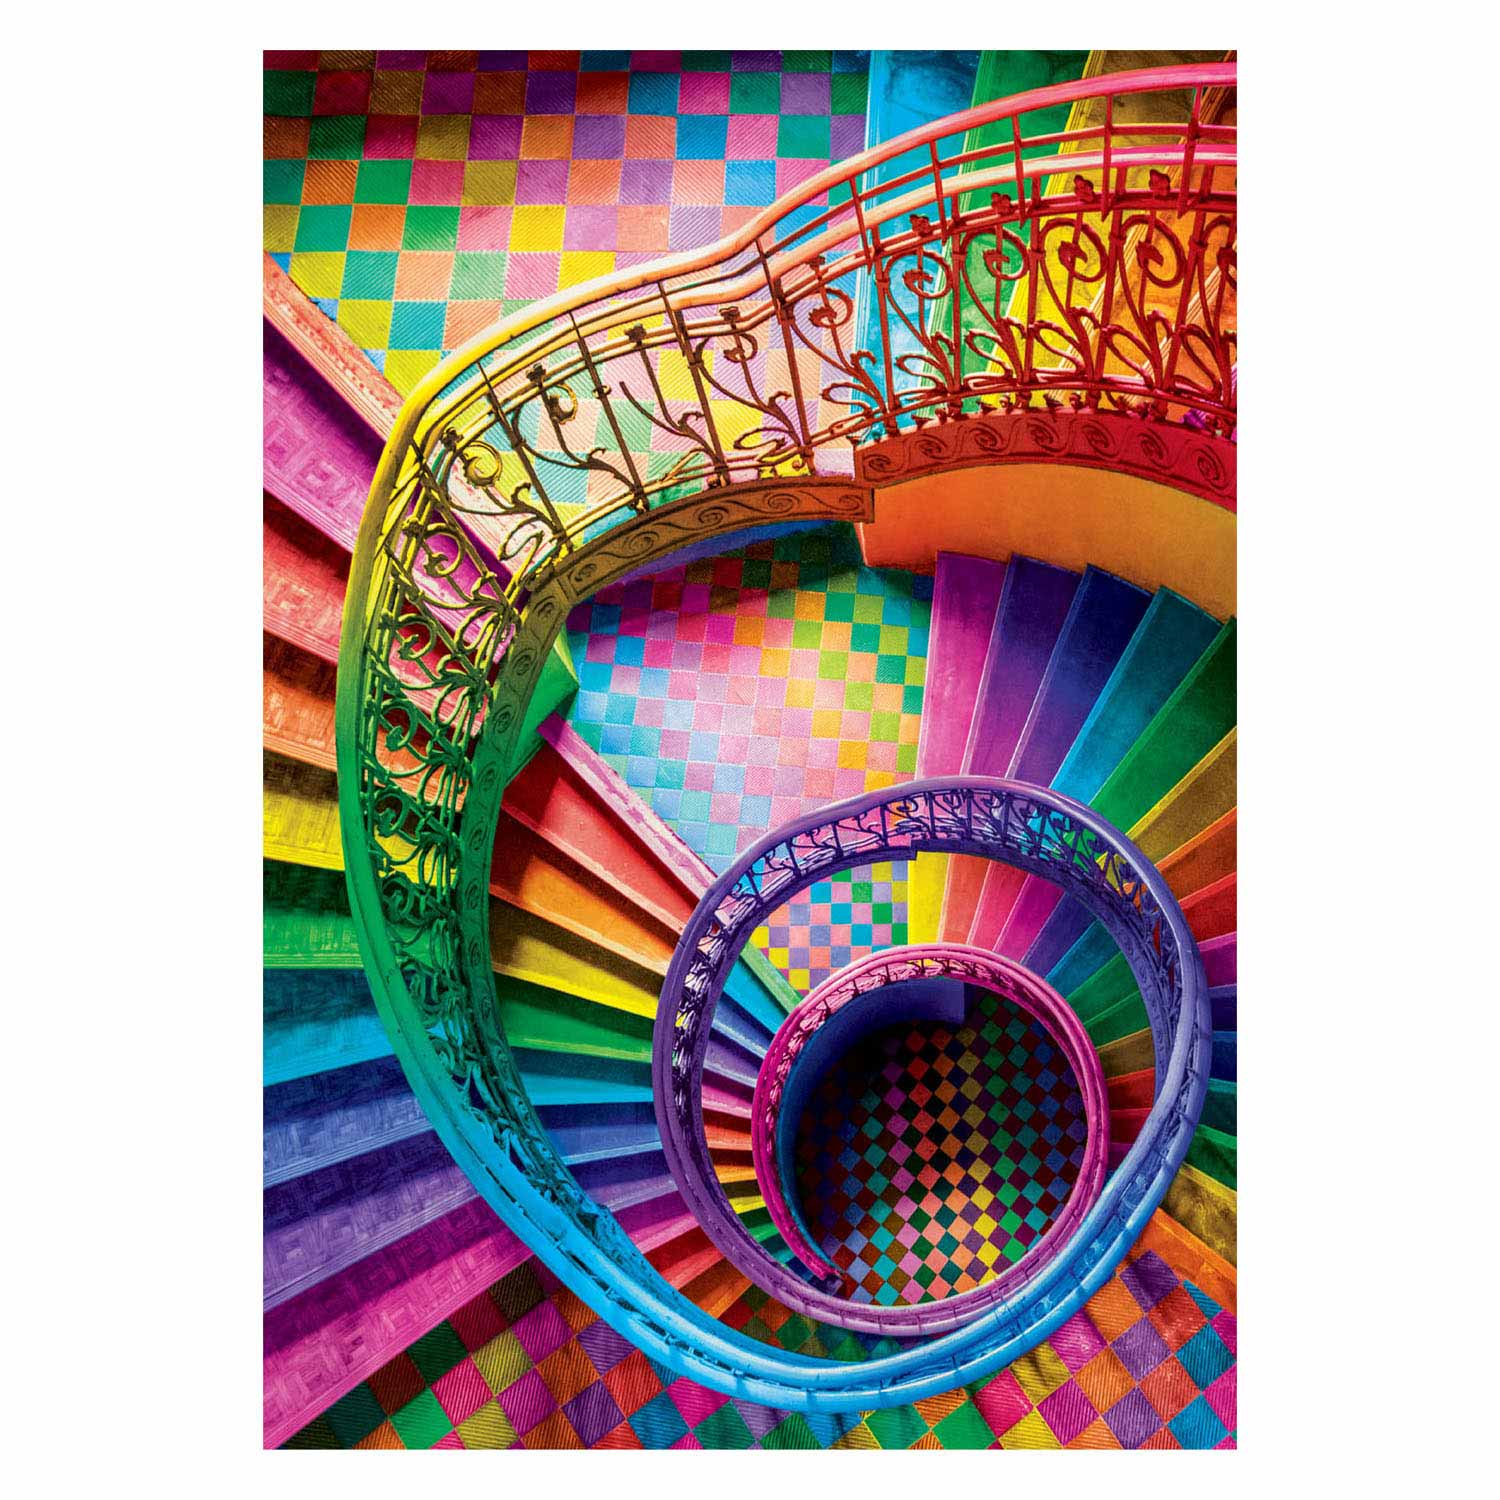 Clementoni Colorboom Legpuzzel Stairs, 500st.